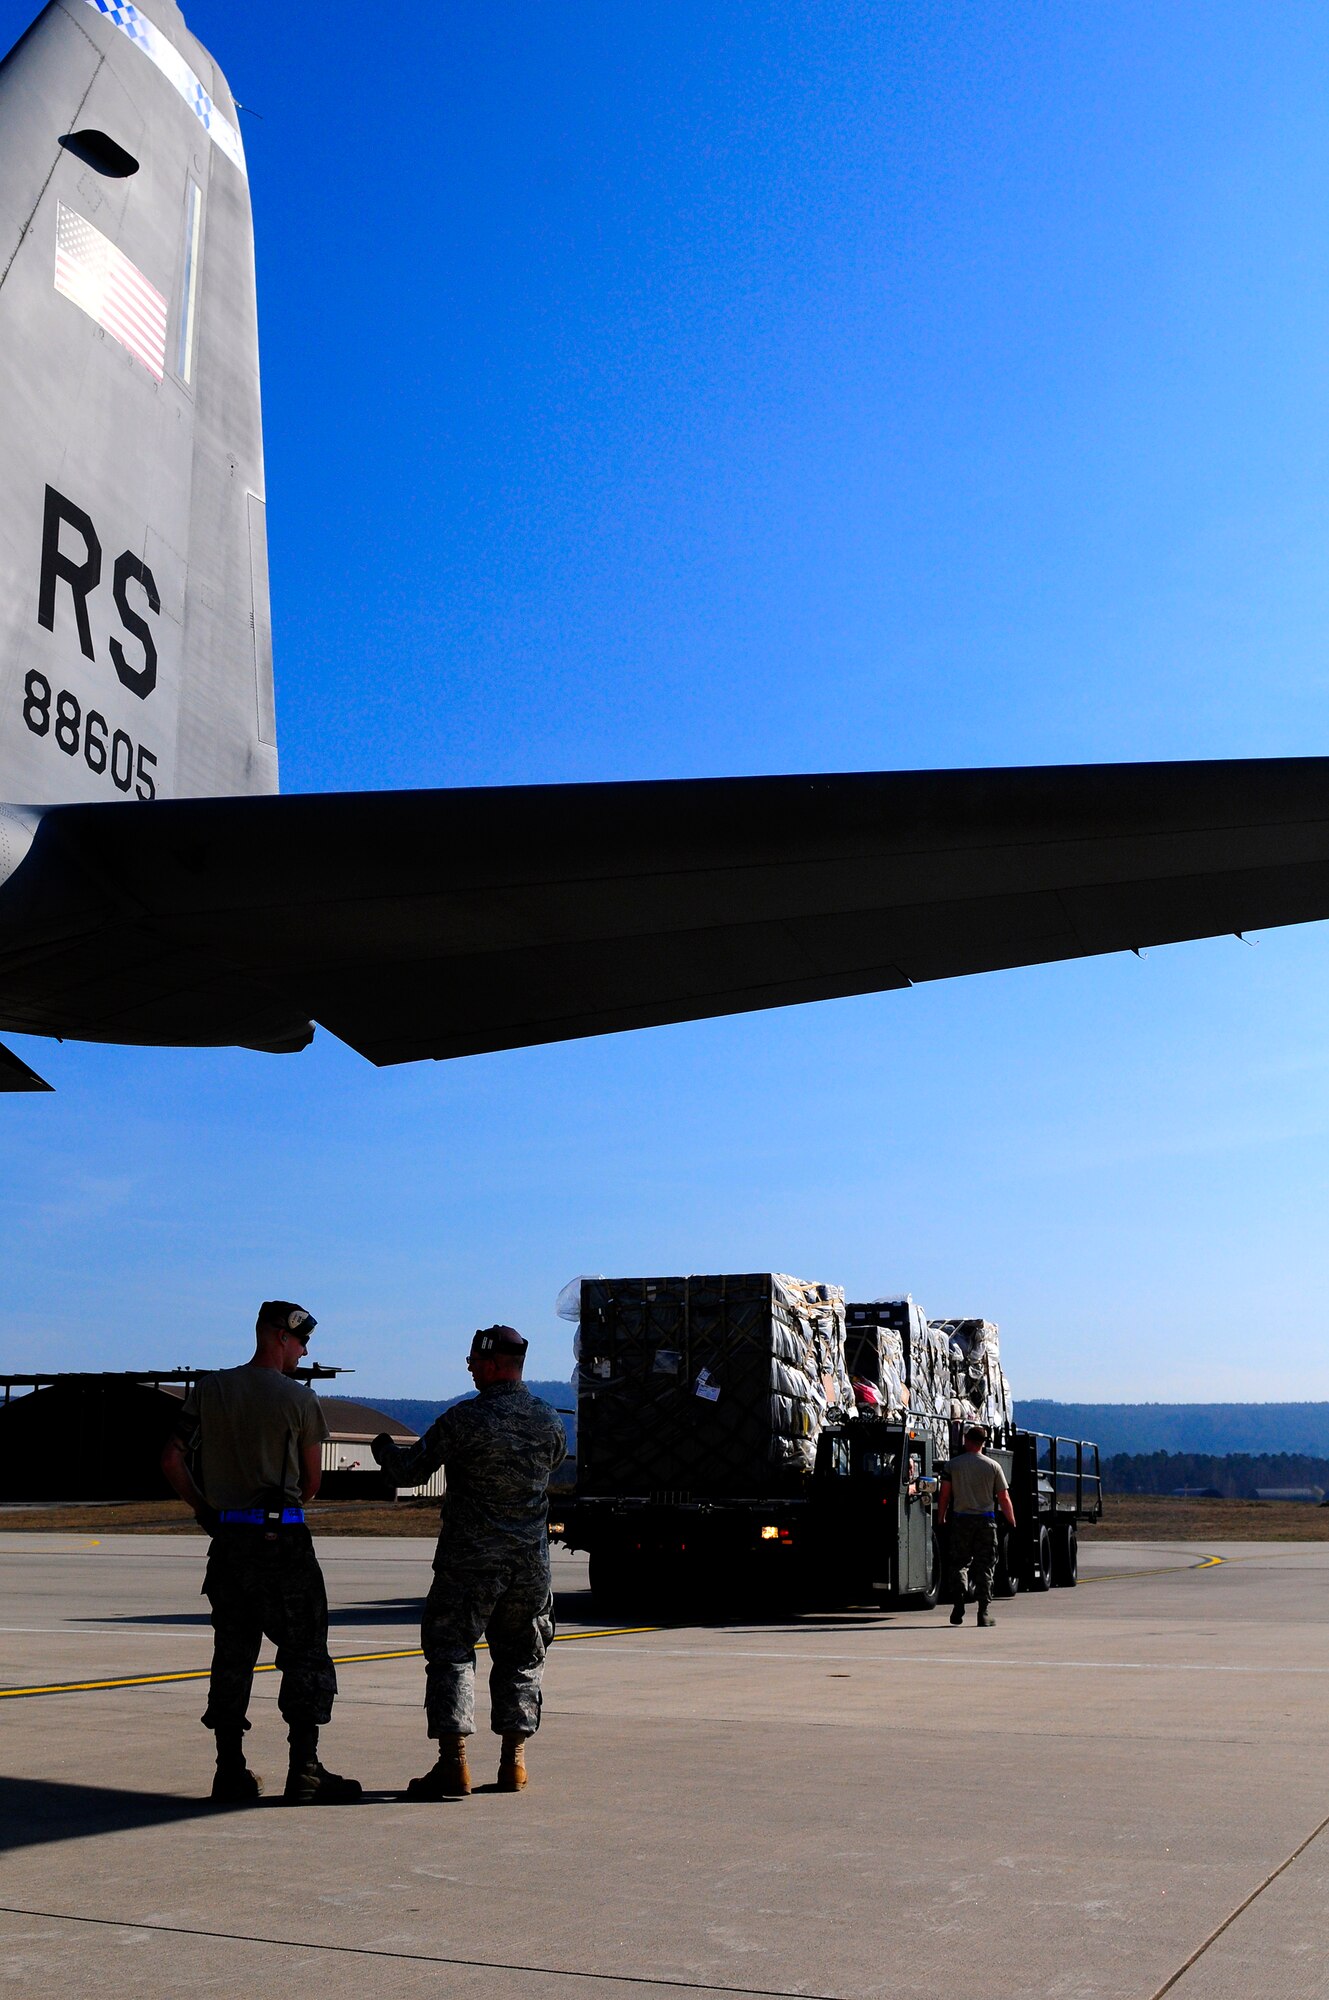 U.S. Air Force Airmen from the 721st Aerial Port Squadron wait to load cargo onto a C-130J Super Hercules for its departure in support of Joint Task Force Odyssey Dawn, Ramstein Air Base, Germany, March 24, 2011. Joint Task Force Odyssey Dawn is the U.S. Africa Command task force established to provide operational and tactical command and control of U.S. military forces supporting the international response to the unrest in Libya and enforcement of United Nations Security Council Resolution 1973. UNSCR 1973 authorizes all necessary measures to protect civilians in Libya under threat of attack by Qadhafi regime forces. JTF Odyssey Dawn is commanded by U.S. Navy Admiral Samuel J. Locklear, III. (U.S. Air Force Photo by Airman 1st Class Brea Miller)